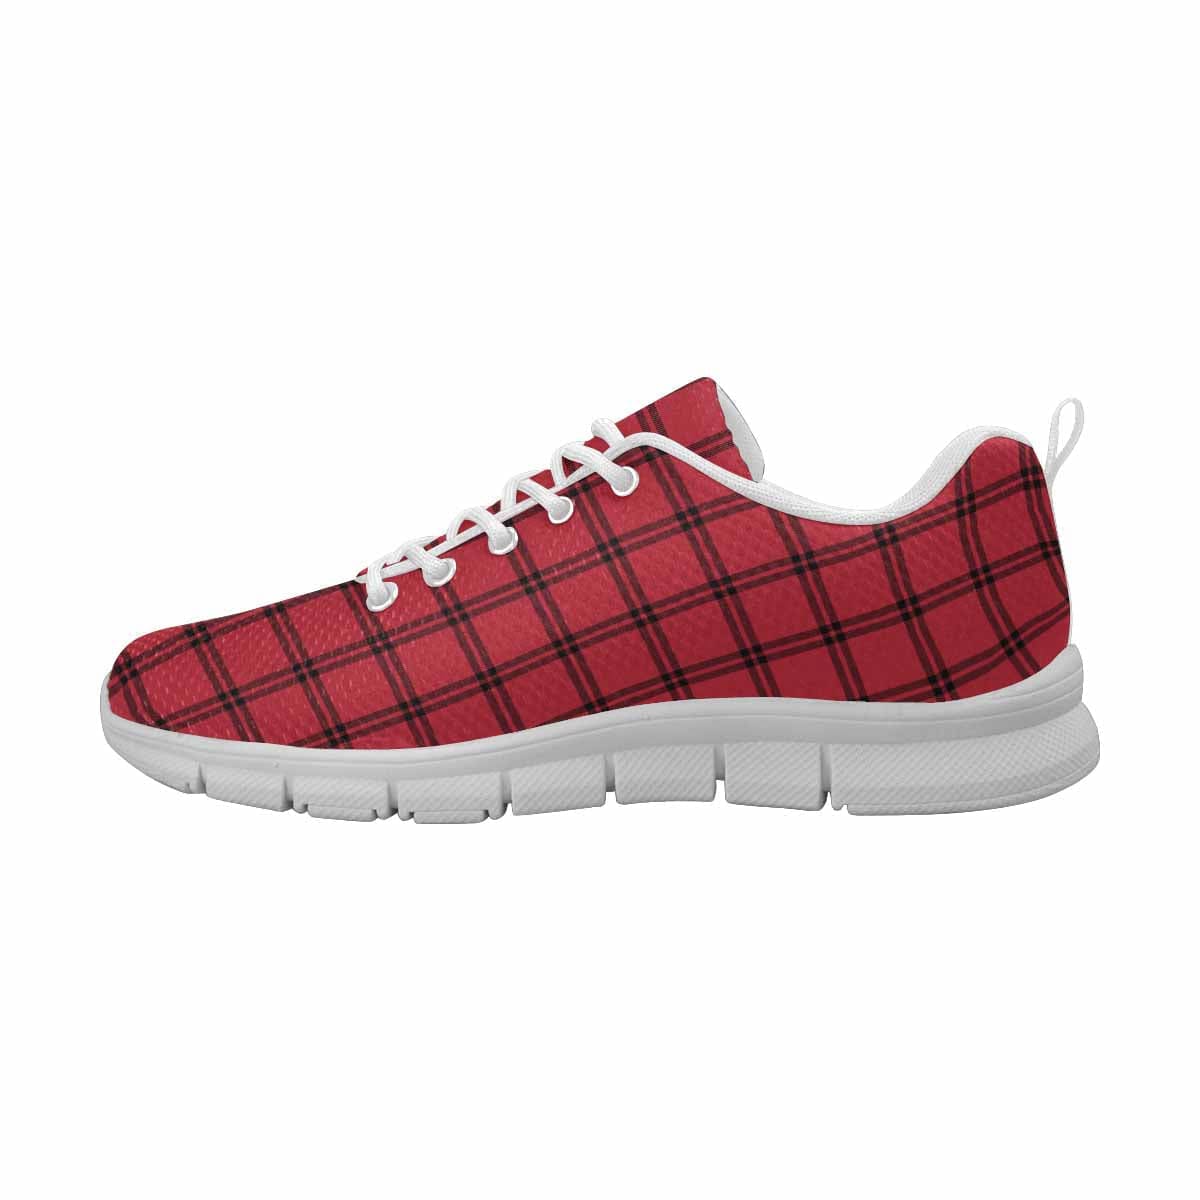 Sneakers For Men Buffalo Plaid Red And White - Running Shoes Dg837 - Mens |